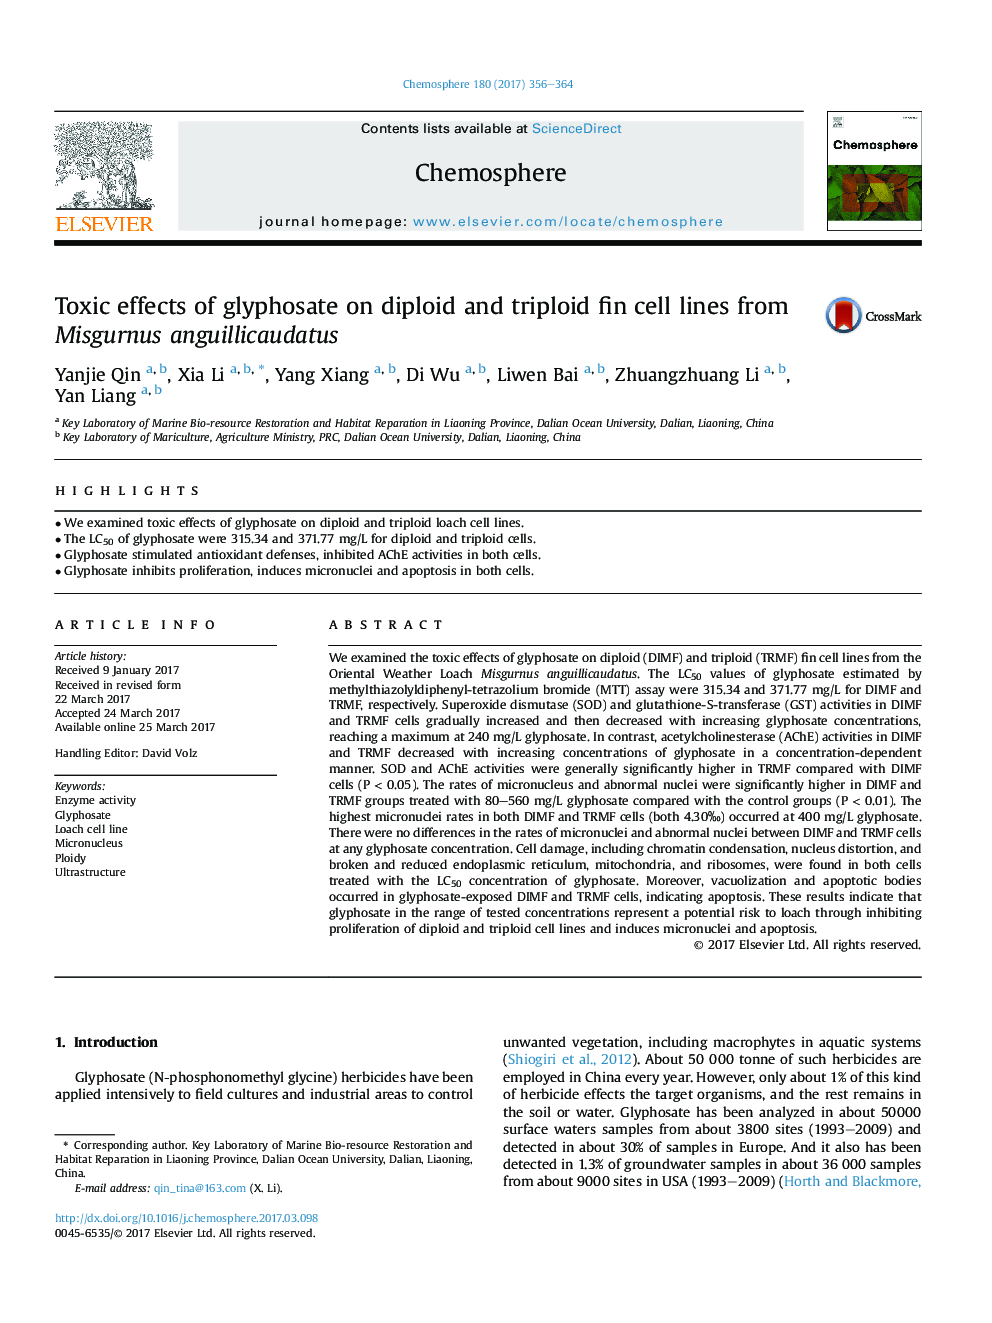 Toxic effects of glyphosate on diploid and triploid fin cell lines from Misgurnus anguillicaudatus